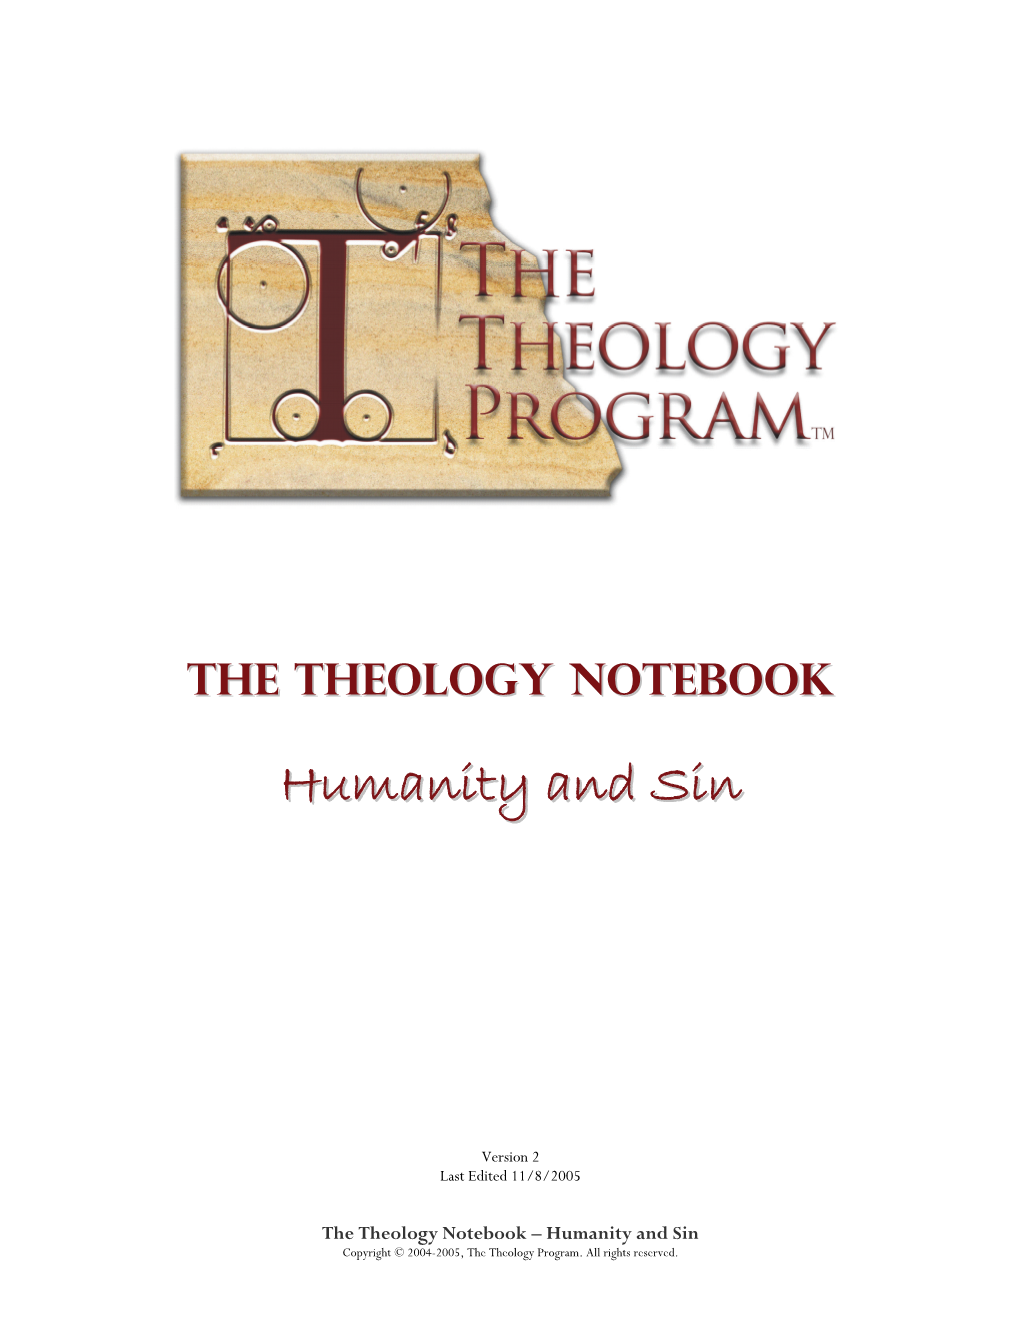 Humanity and Sin Student Notebook